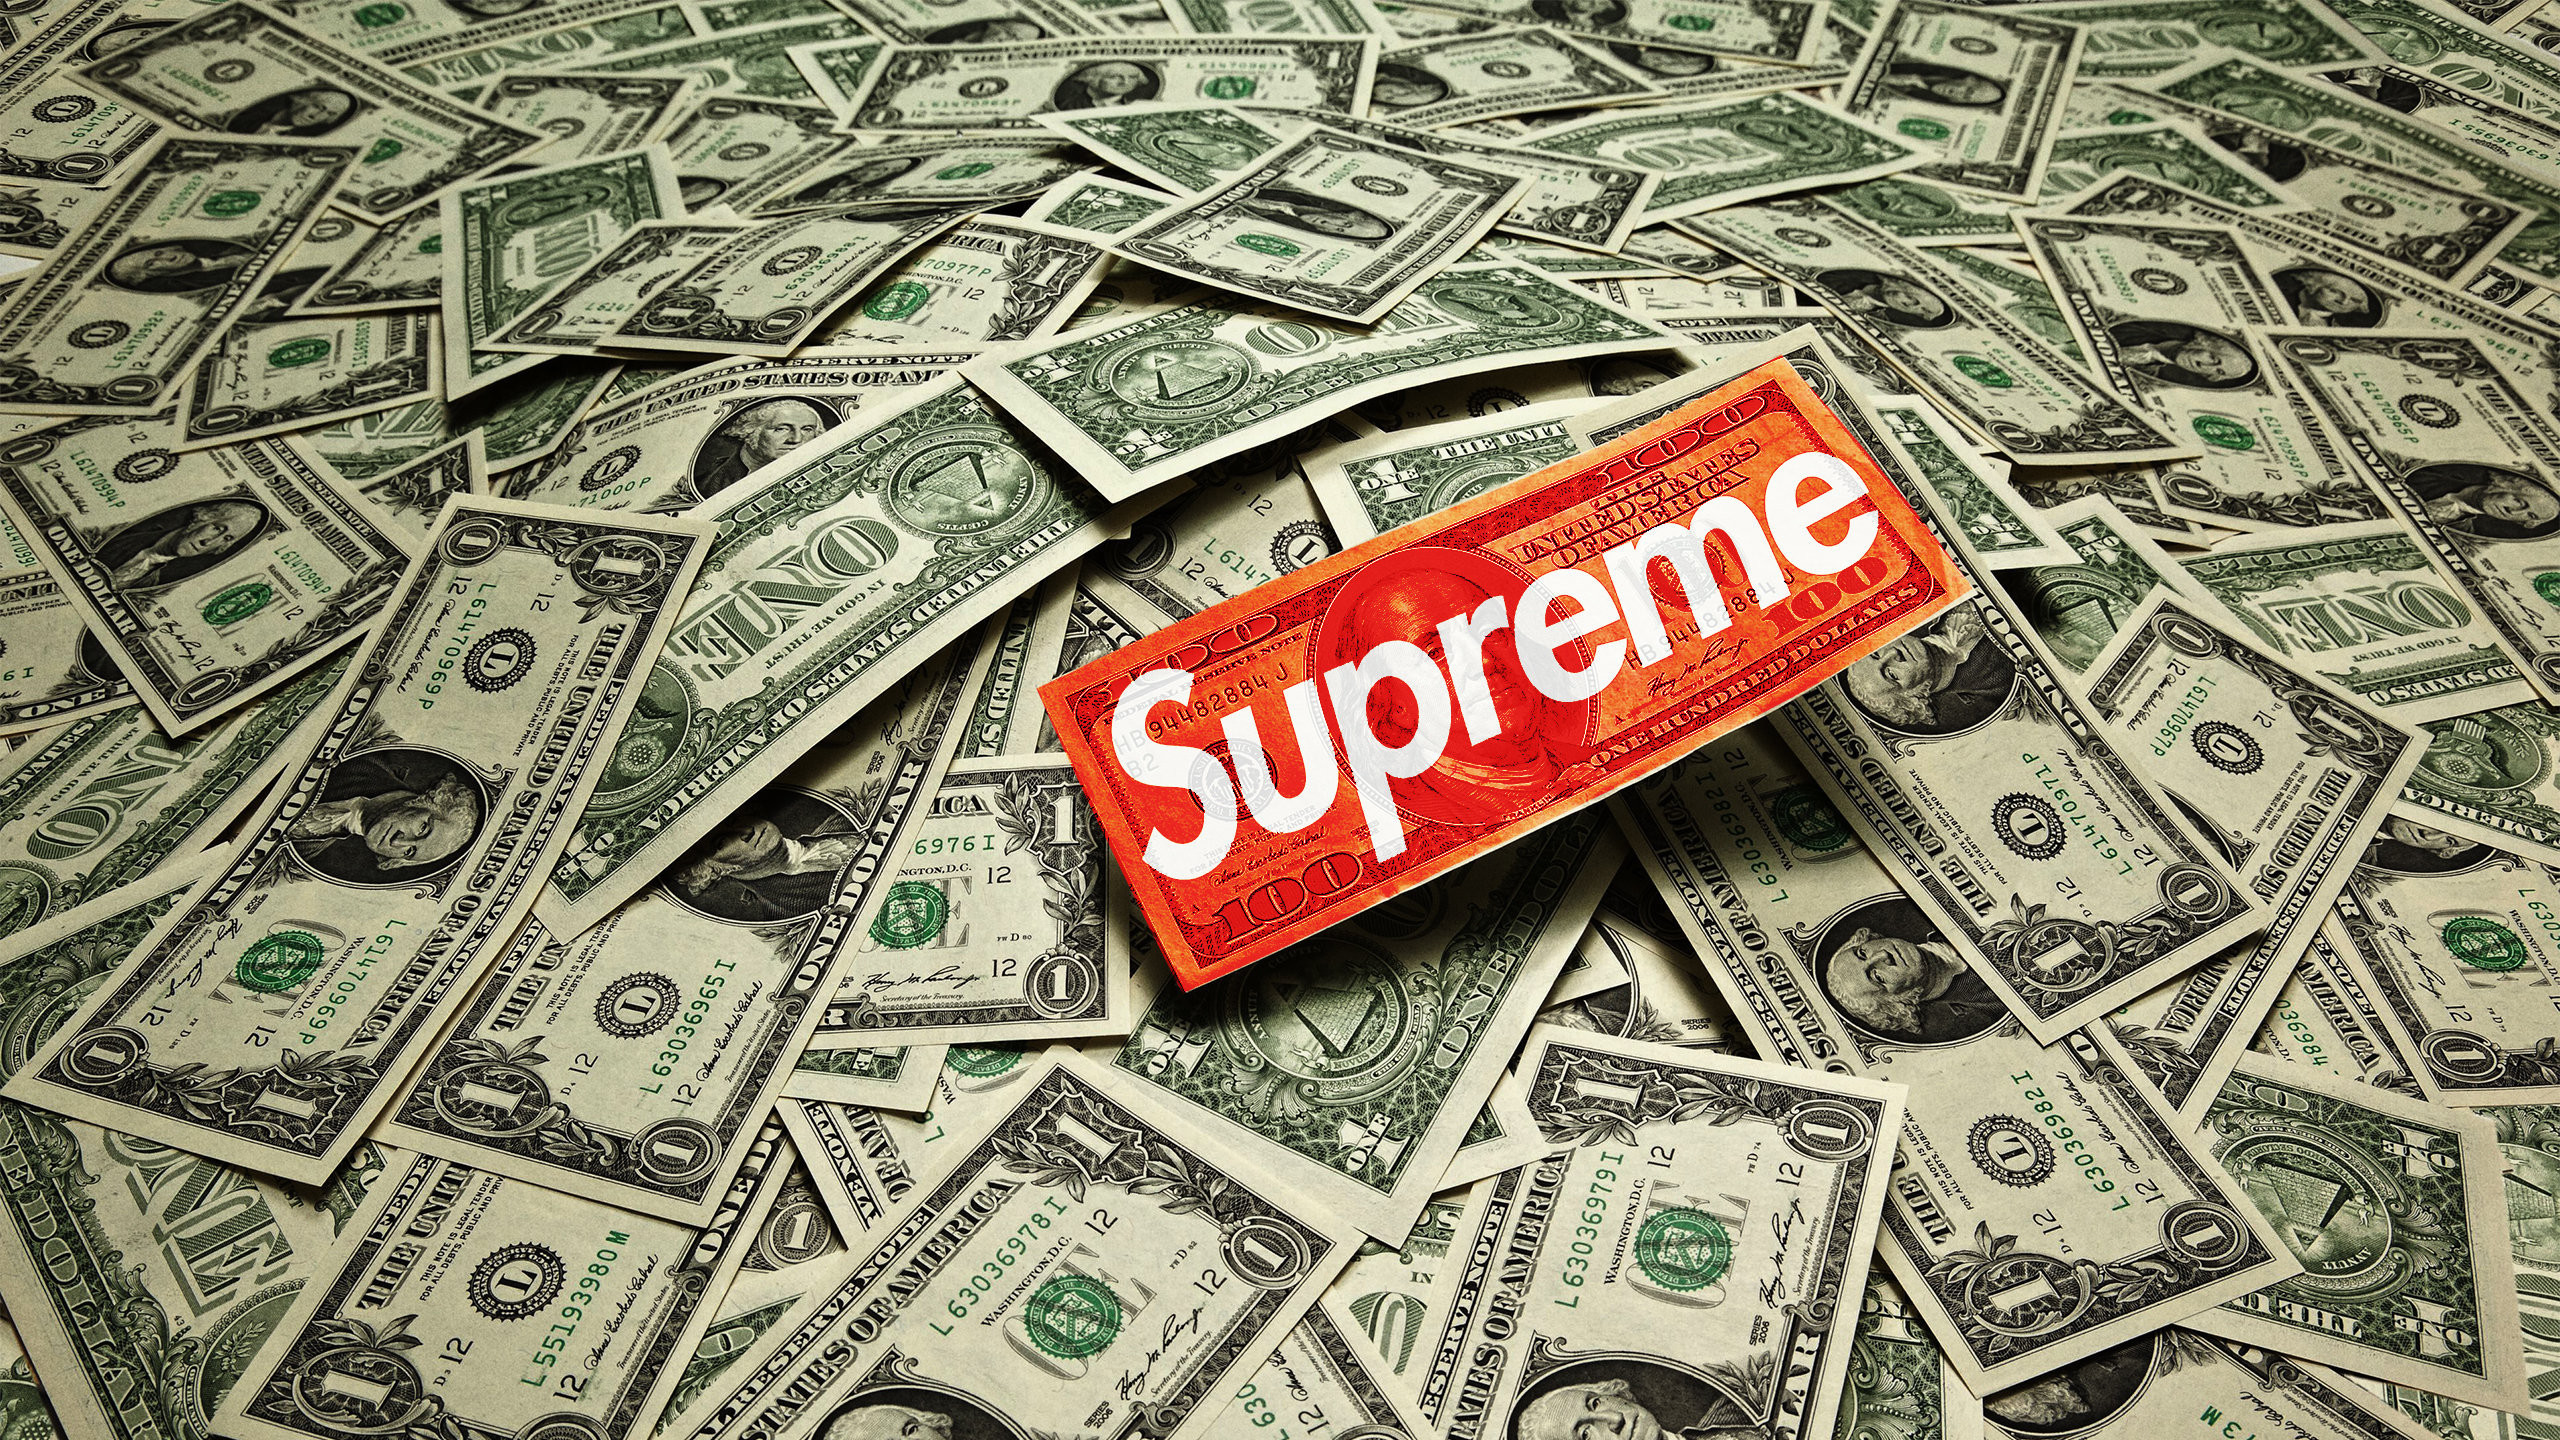 2560x1440 Download the Supreme Cash wallpaper below for your mobile device (Android  phones, iPhone etc.)